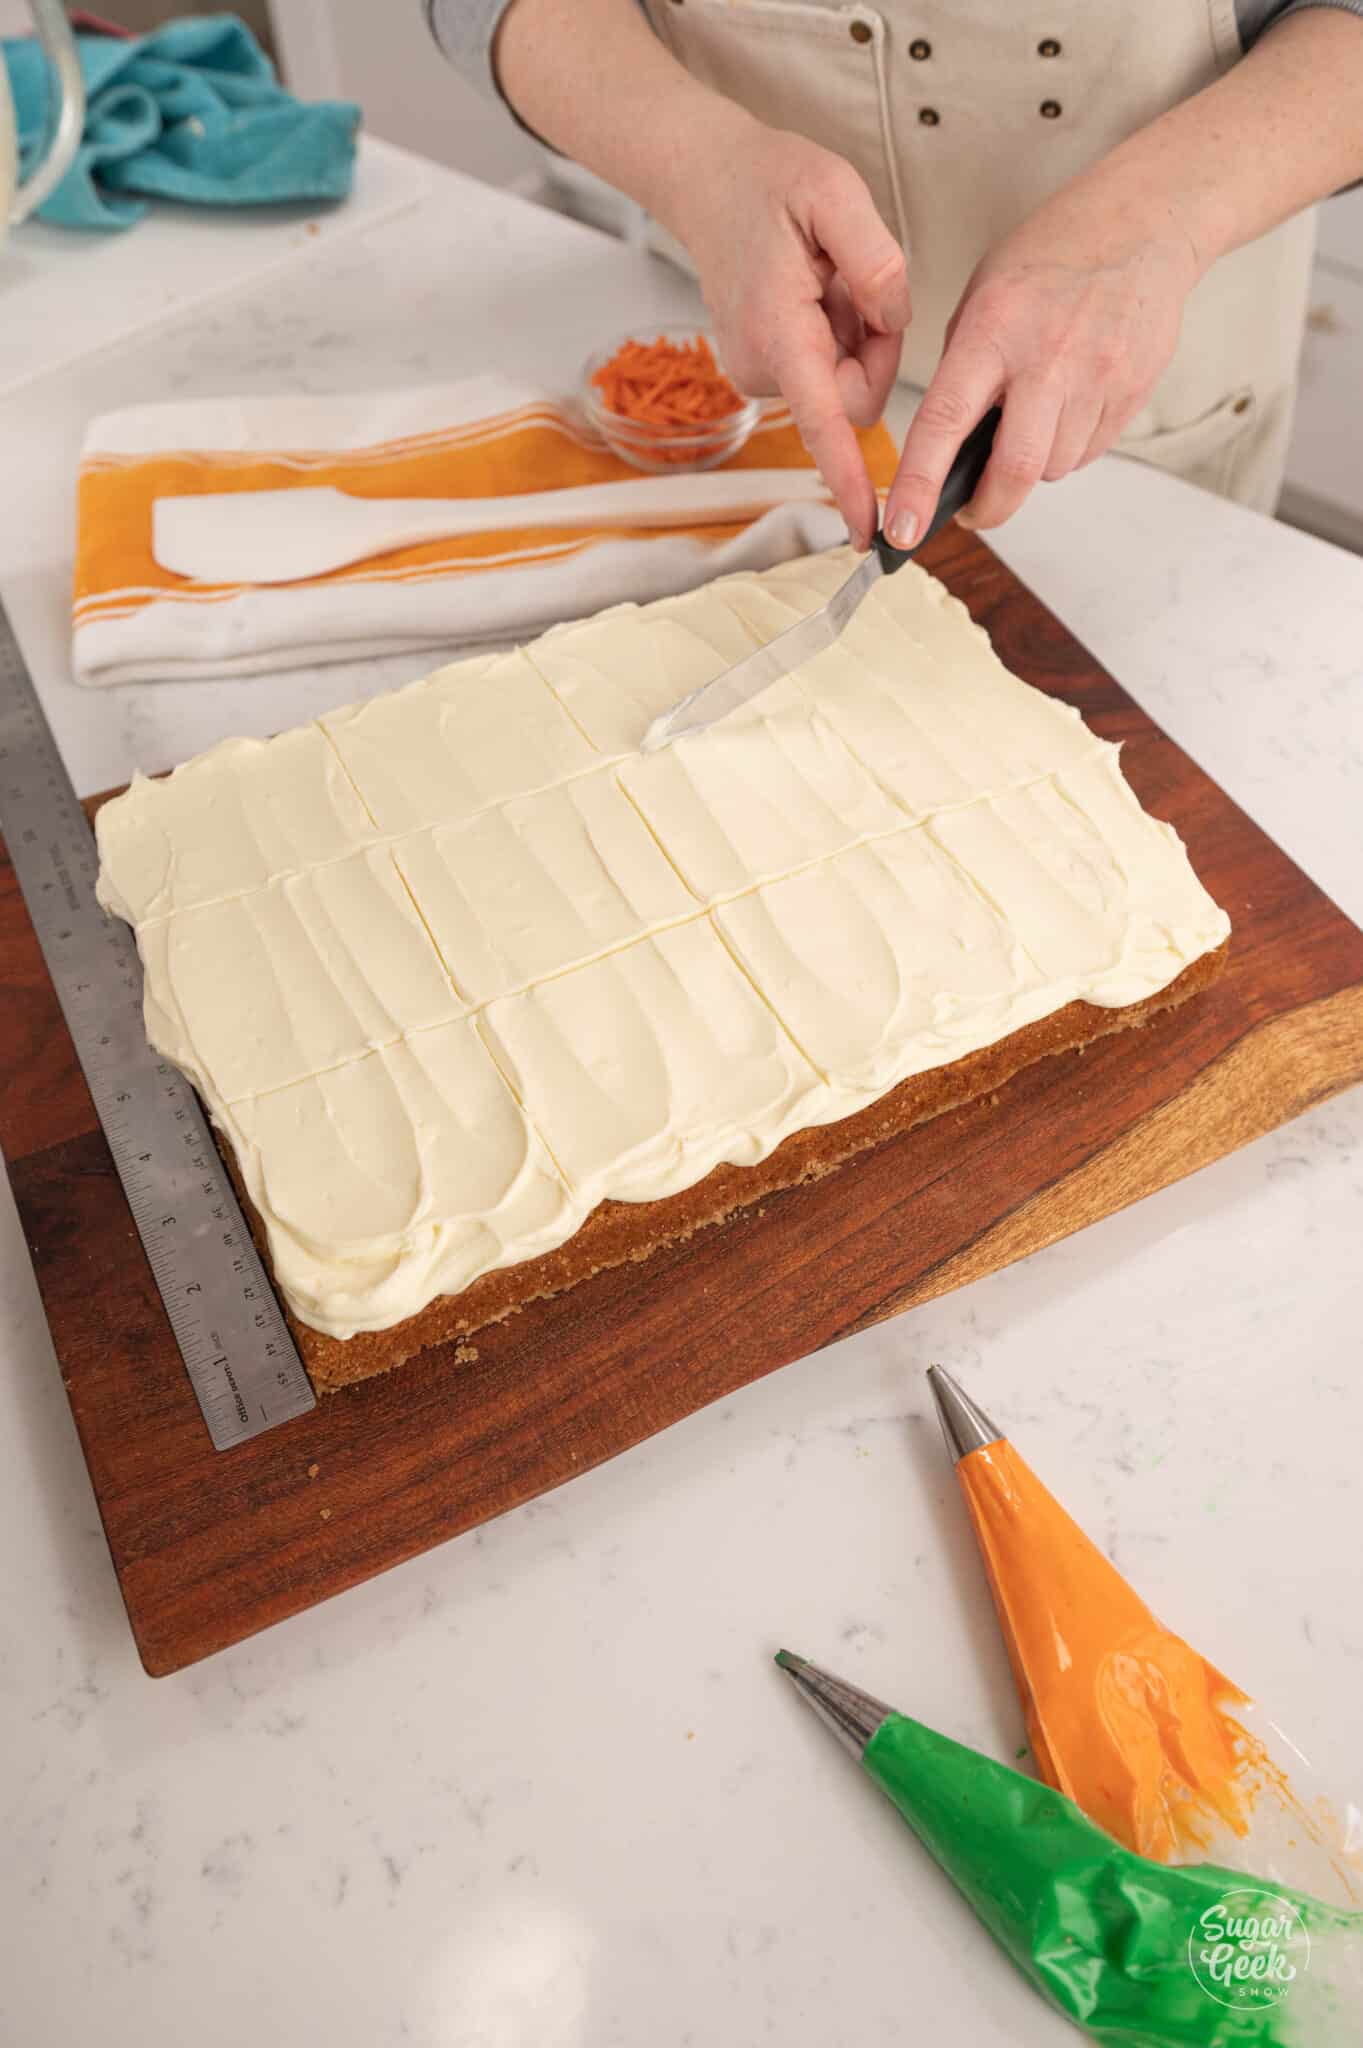 Hands scoring lines in the top of frosting